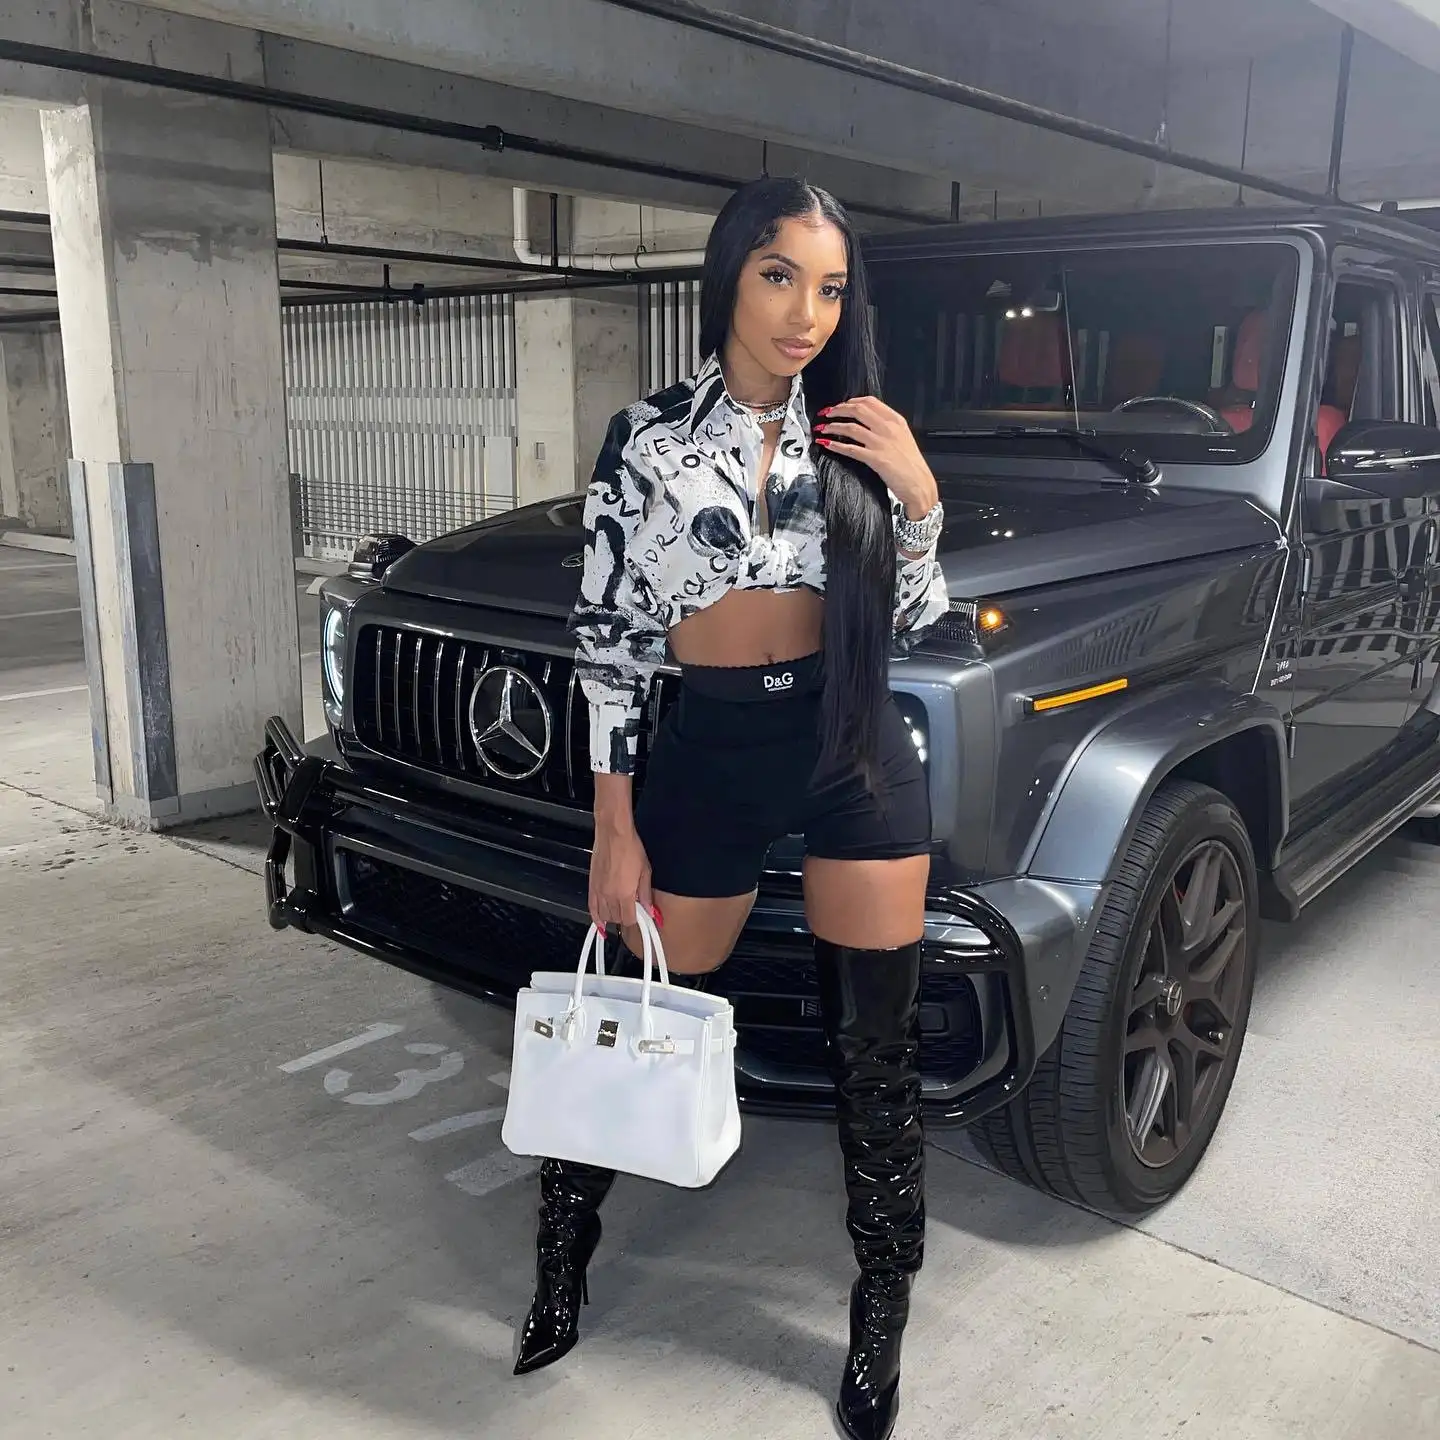 Hot Style New Arrival Plus Size Women Two Piece Shorts Set Black Printed T-shirt Blouse And Shorts Set Bodycon Casual Clothing